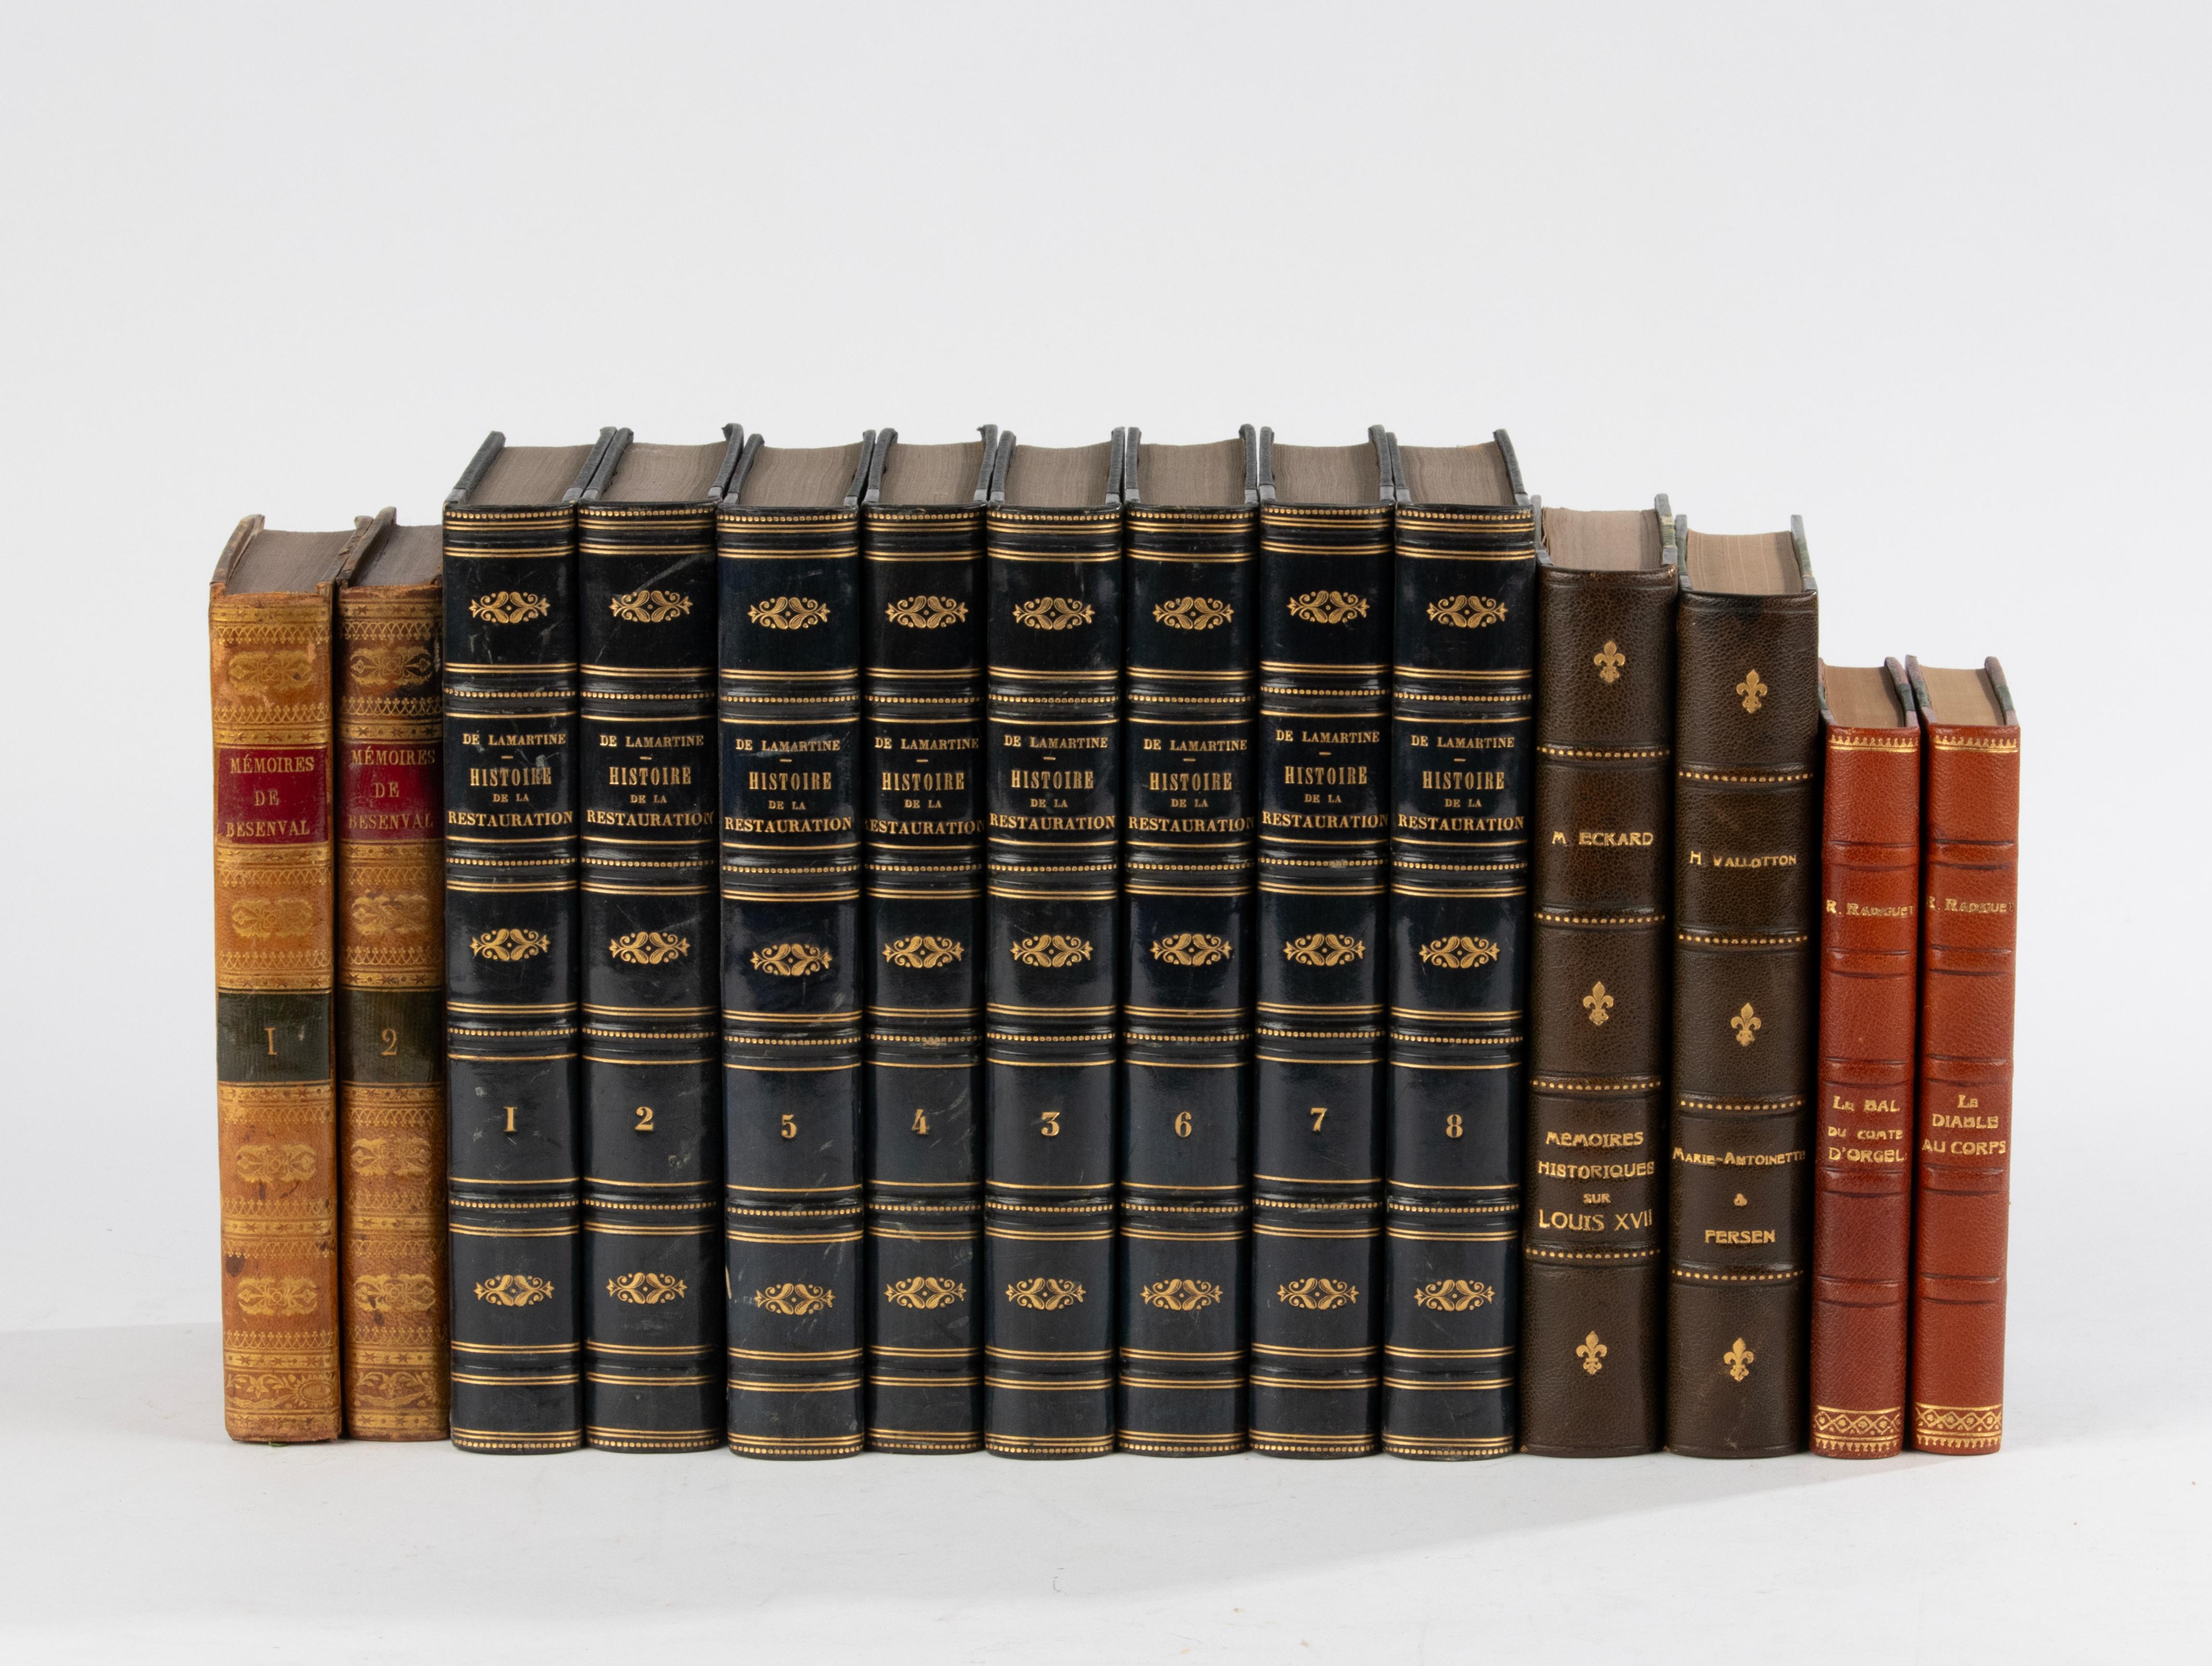 A set of 14 antique French books These books can beautifully decorate your bookcase or office. The leather spines with gold print are in good condition. Inside is also in good condition, no water damage. More sets of books are available in our